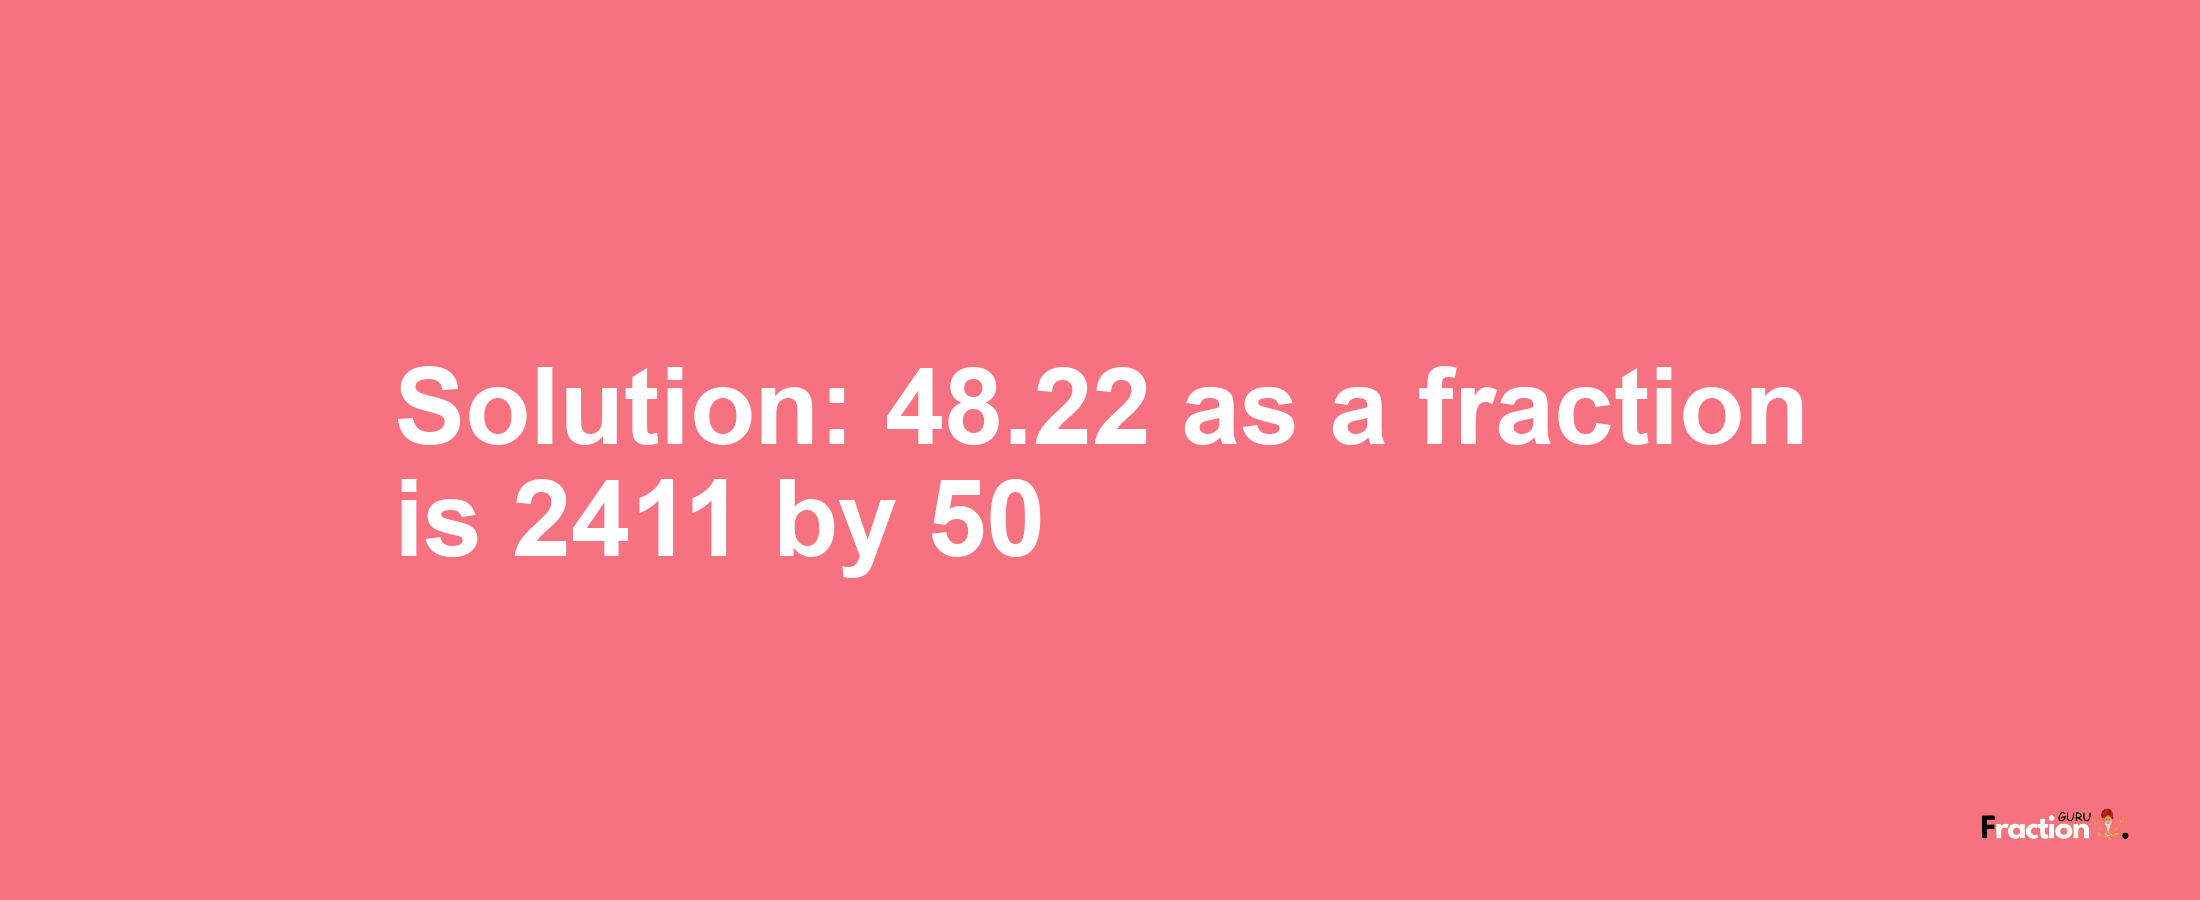 Solution:48.22 as a fraction is 2411/50